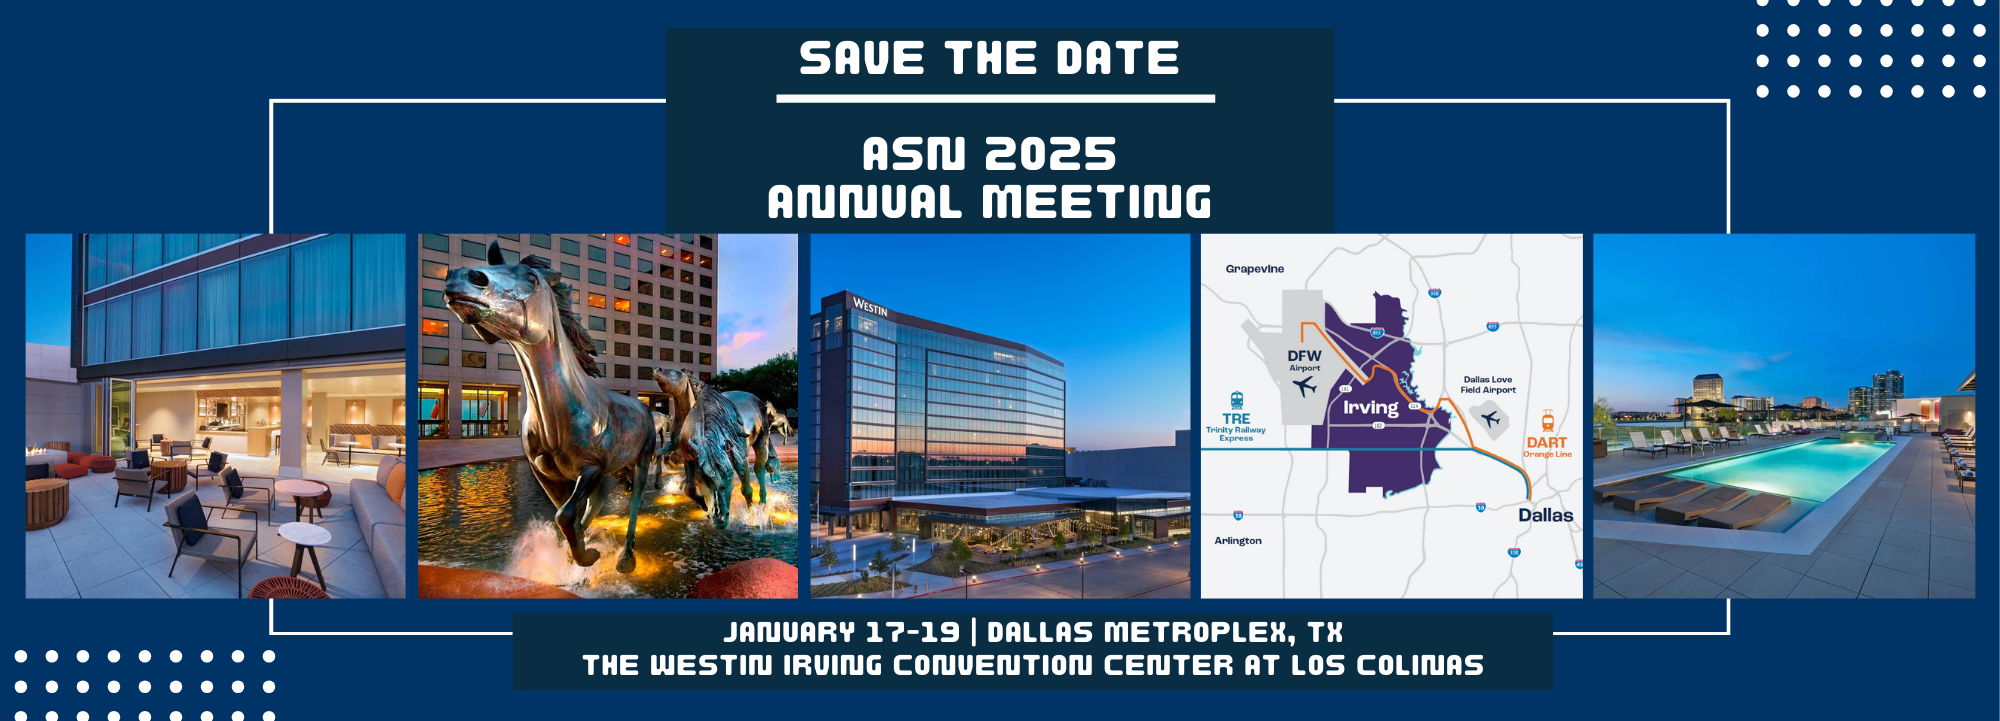 2025 ASN Annual Meeting The American Society of Neuroimaging